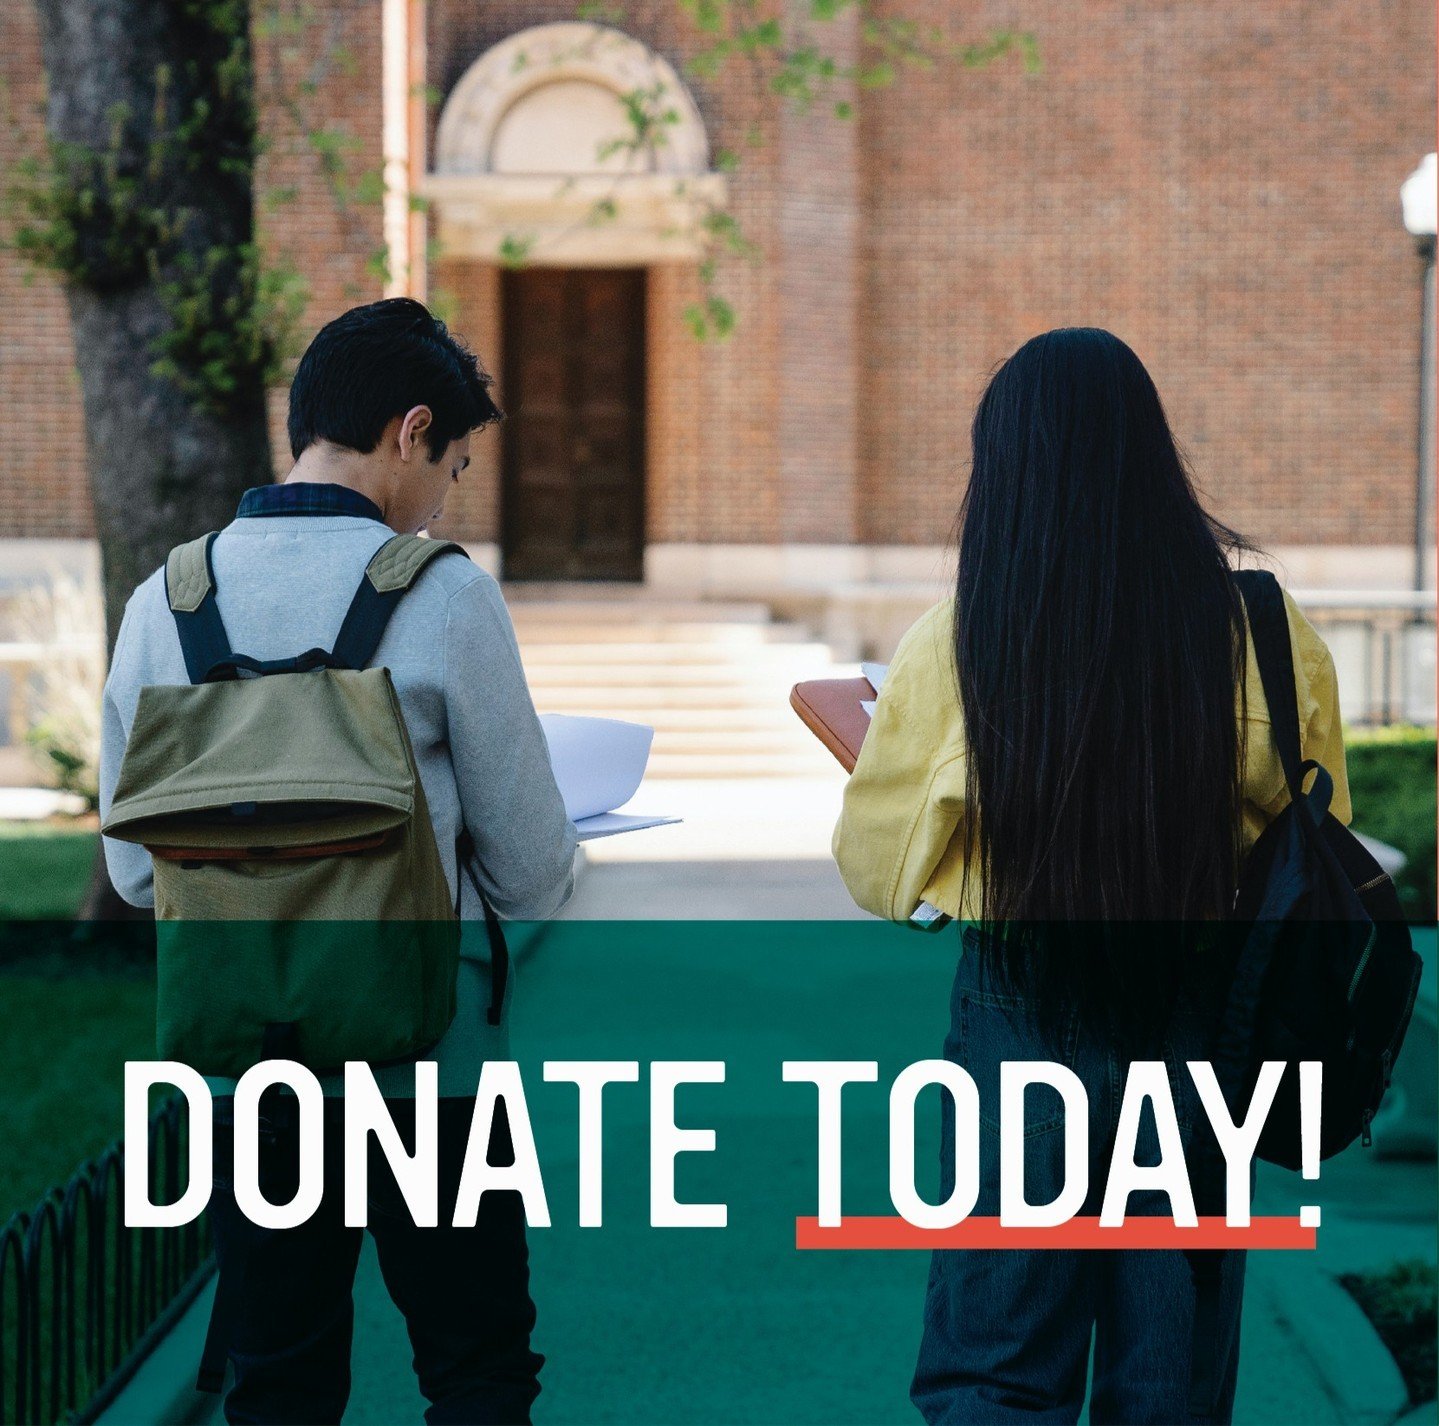 As the cost of living and tuition increases, more college students face the impossible situation of balancing expenses or purchasing groceries and nutritious meals. 

A small donation today helps fuel our work and directly impacts our advocacy campai